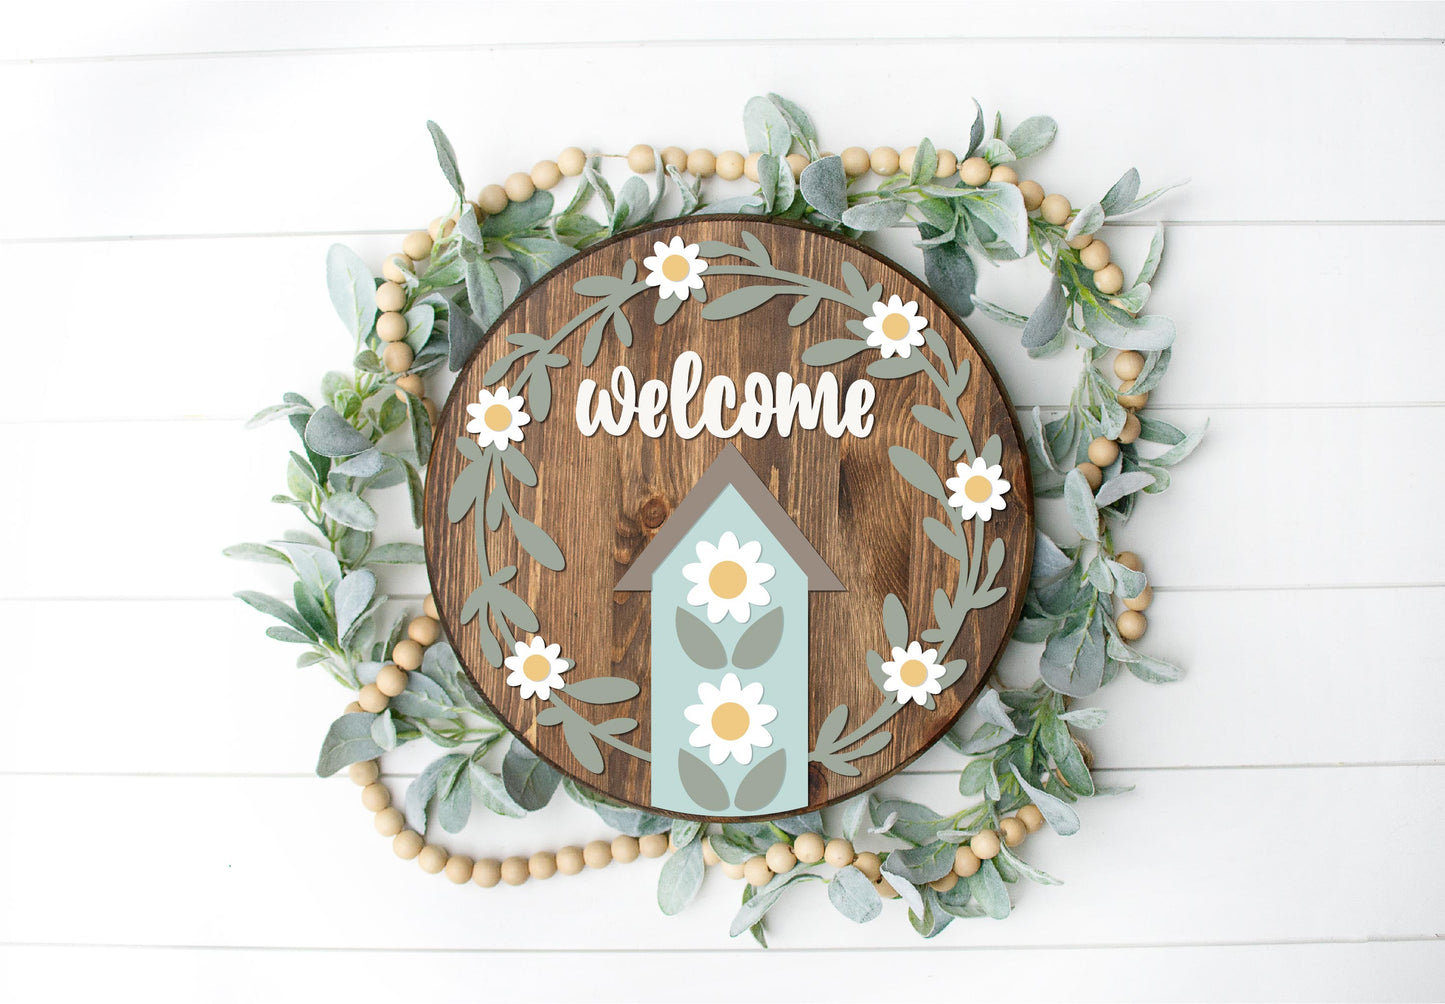 Welcome birdhouse sign